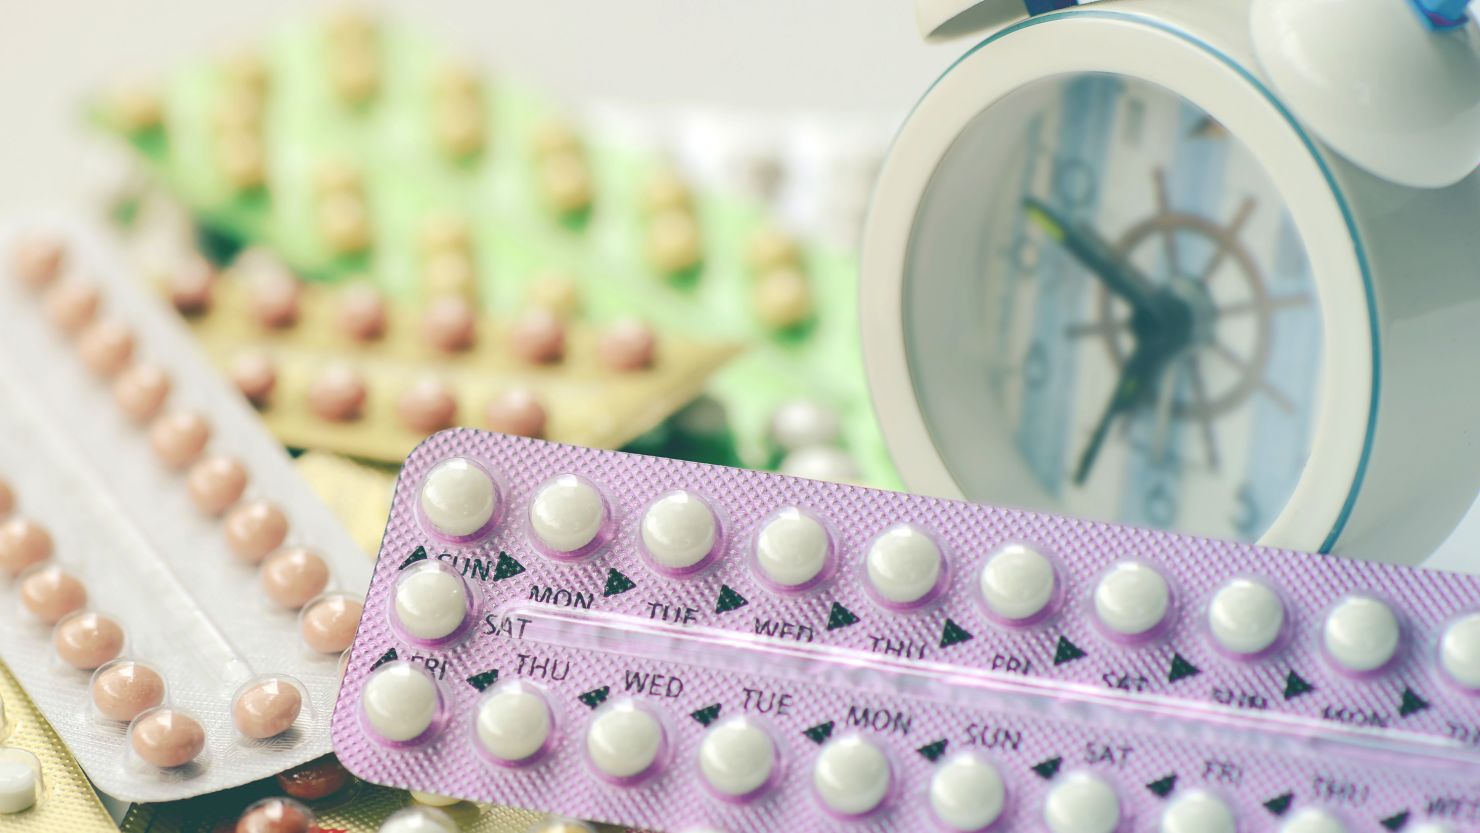 The FDA approved the birth control pill on May 9, 1960.